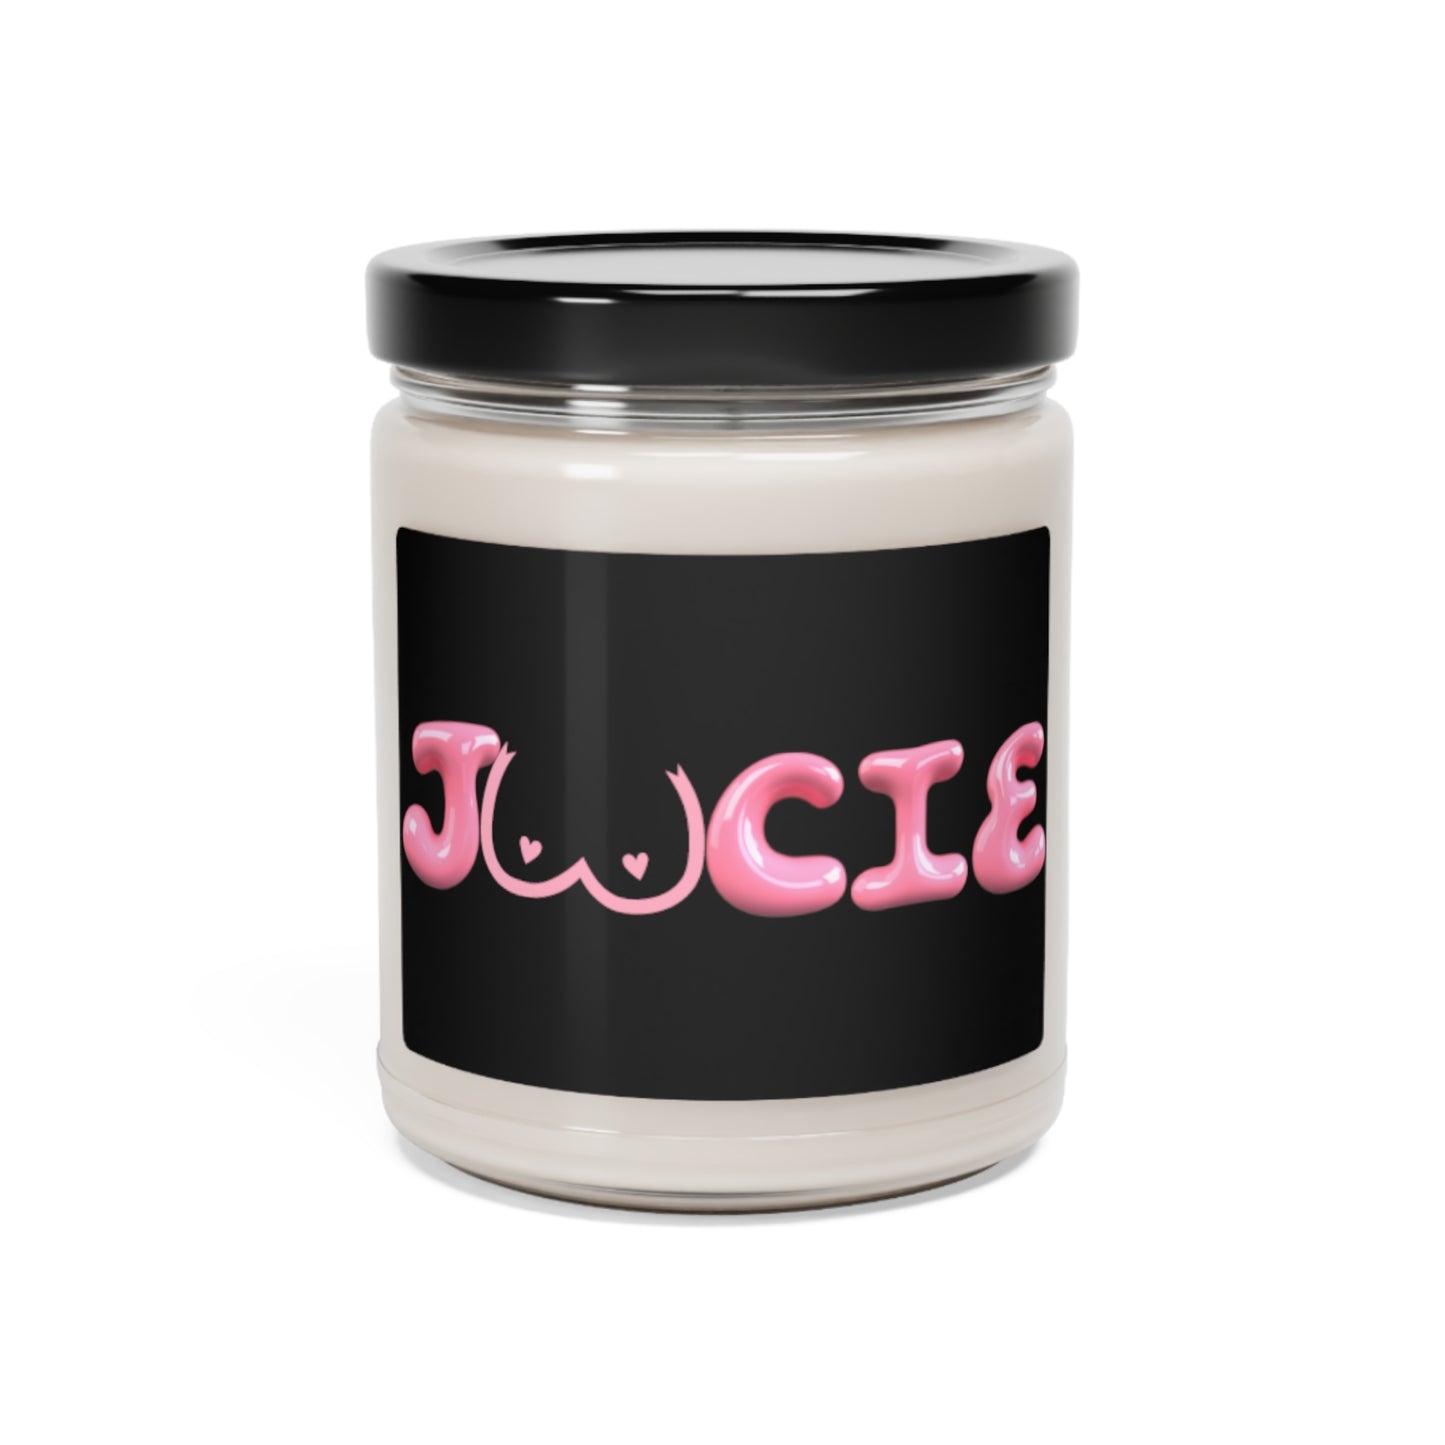 Juucie's Scented Libido Enhancing Soy Candle, 9oz - Juucie